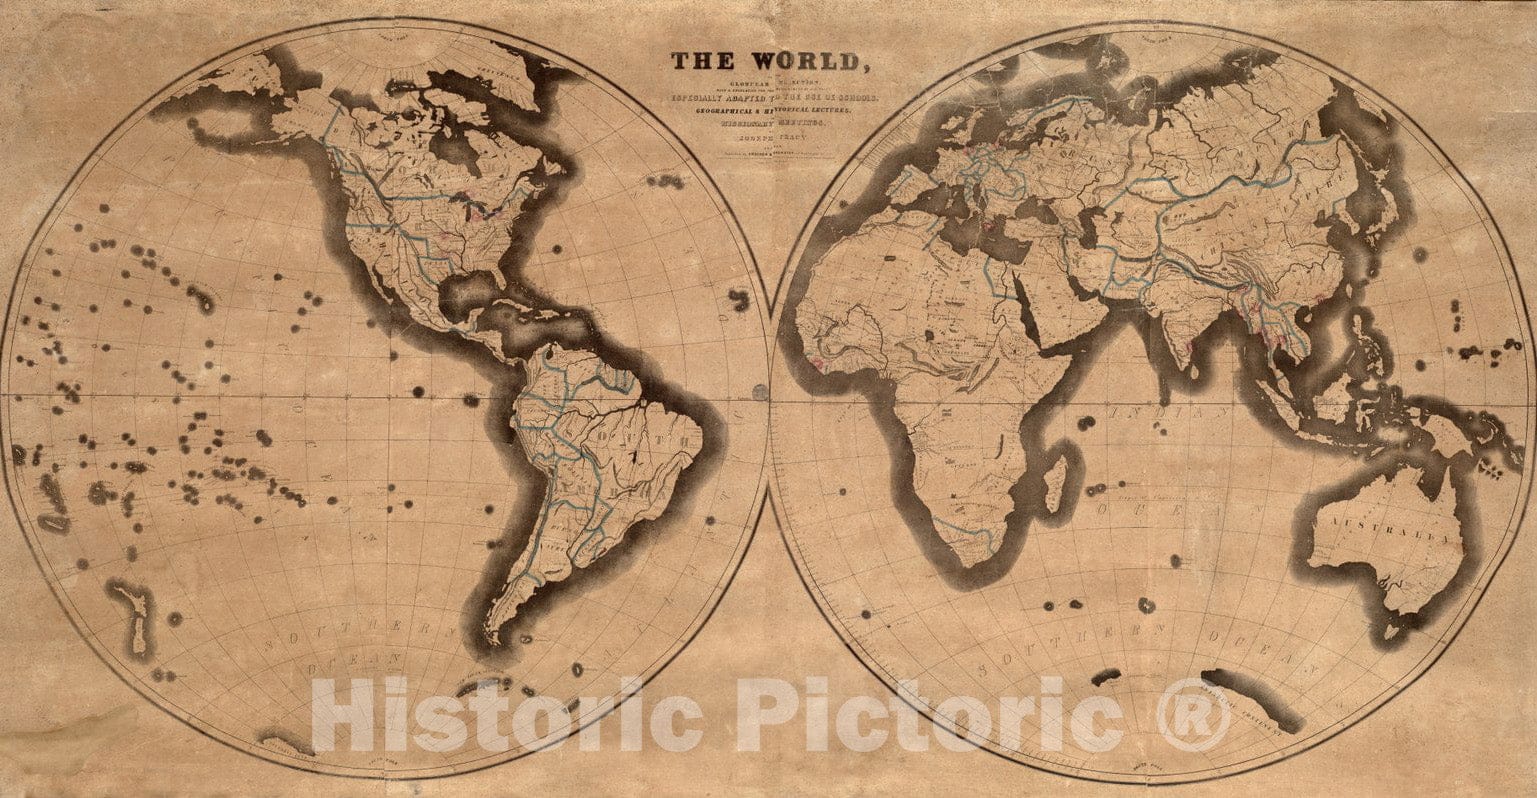 Historical Map, 1843 The World, on The globular Projection with a Graduation for The Measurement of Distances Especially adapted for The use oe Schools, Geographical, Vintage Wall Art